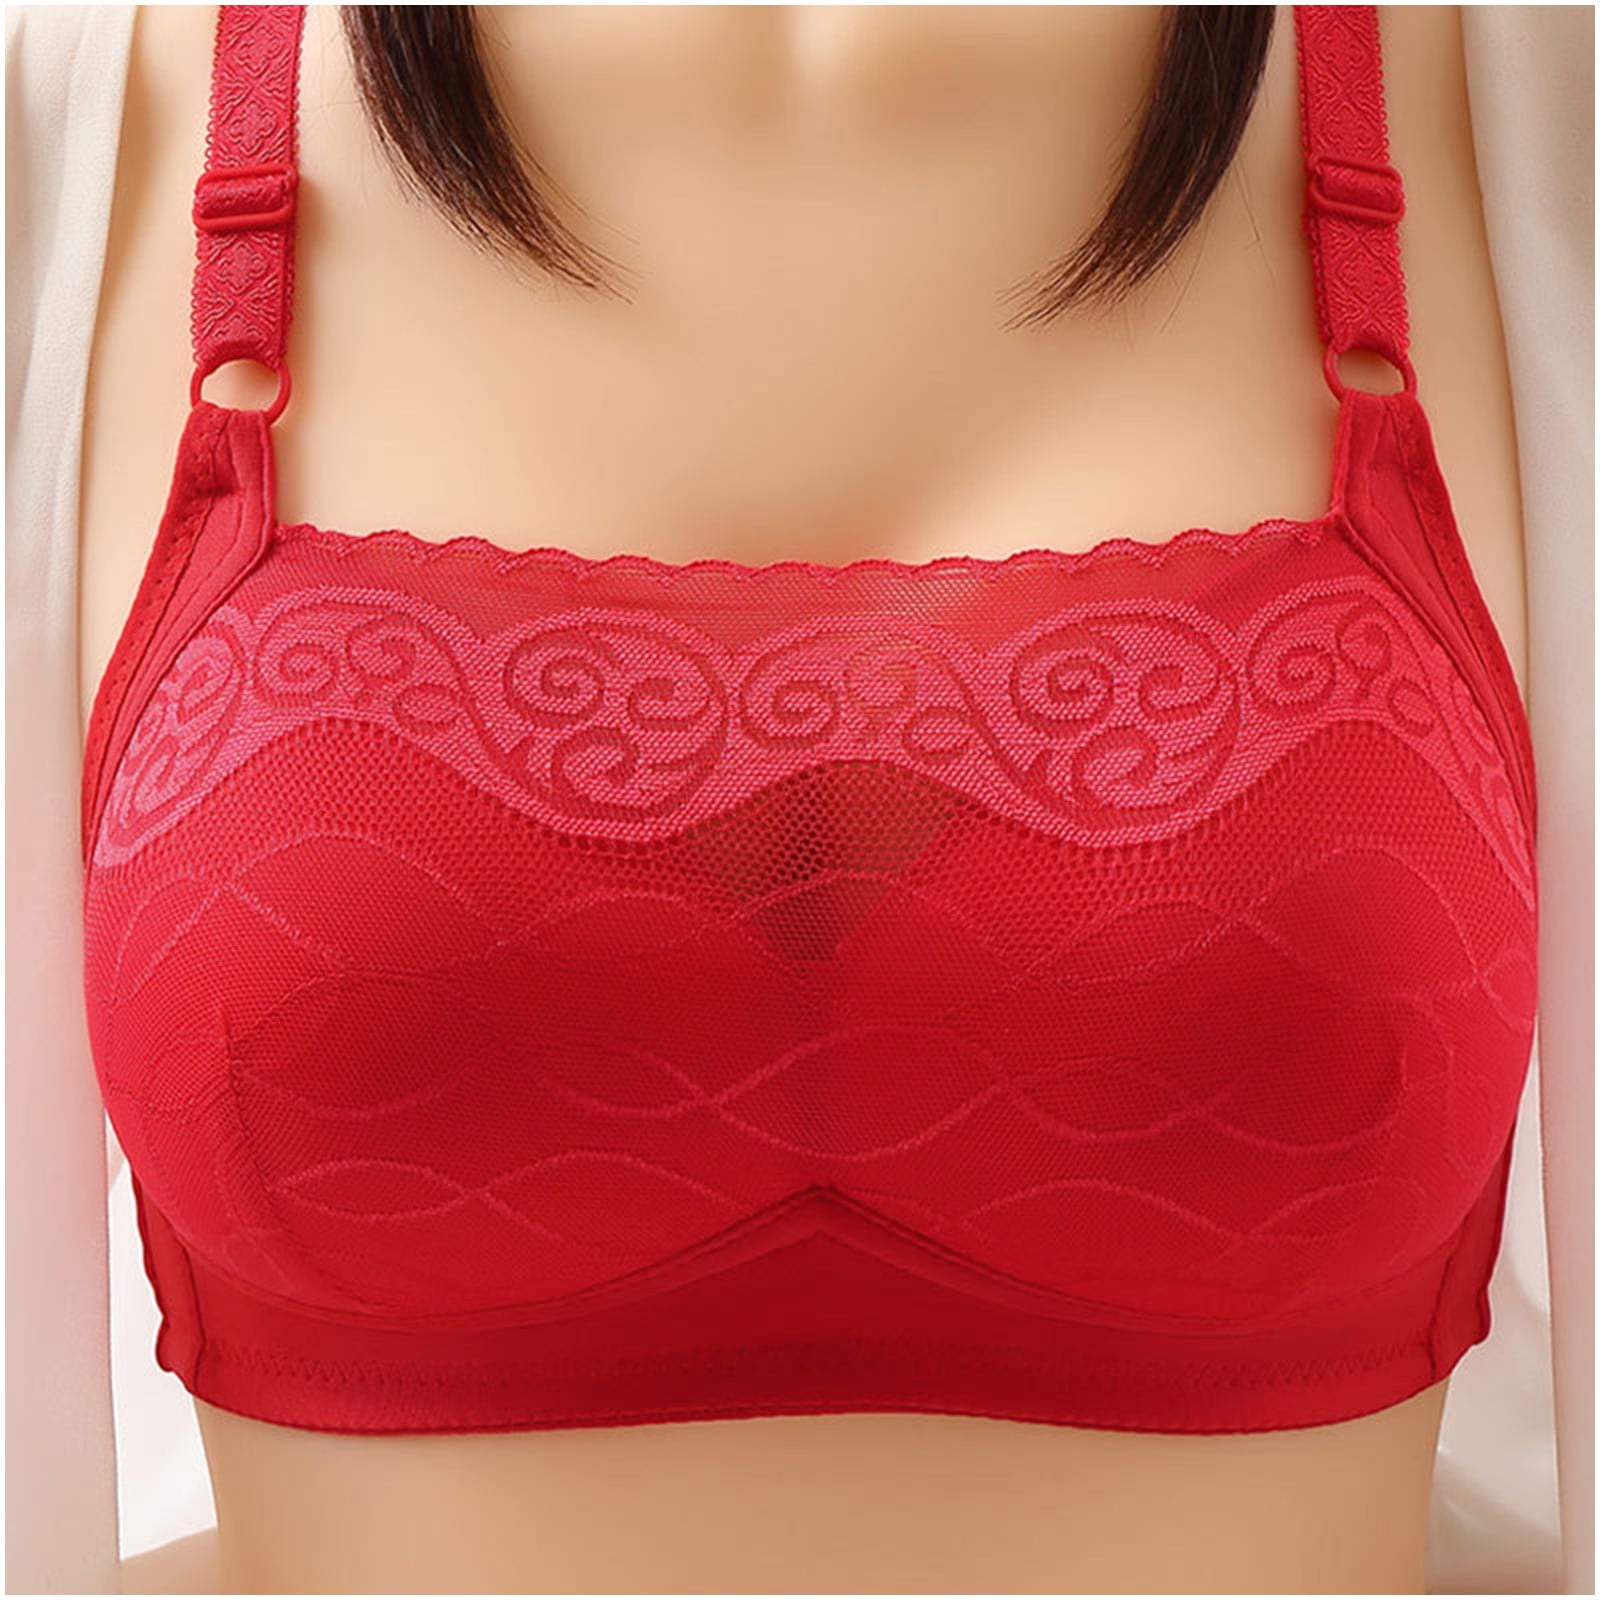 Underwear clearance under $3.00 Bras For Couples Kinky Alluring